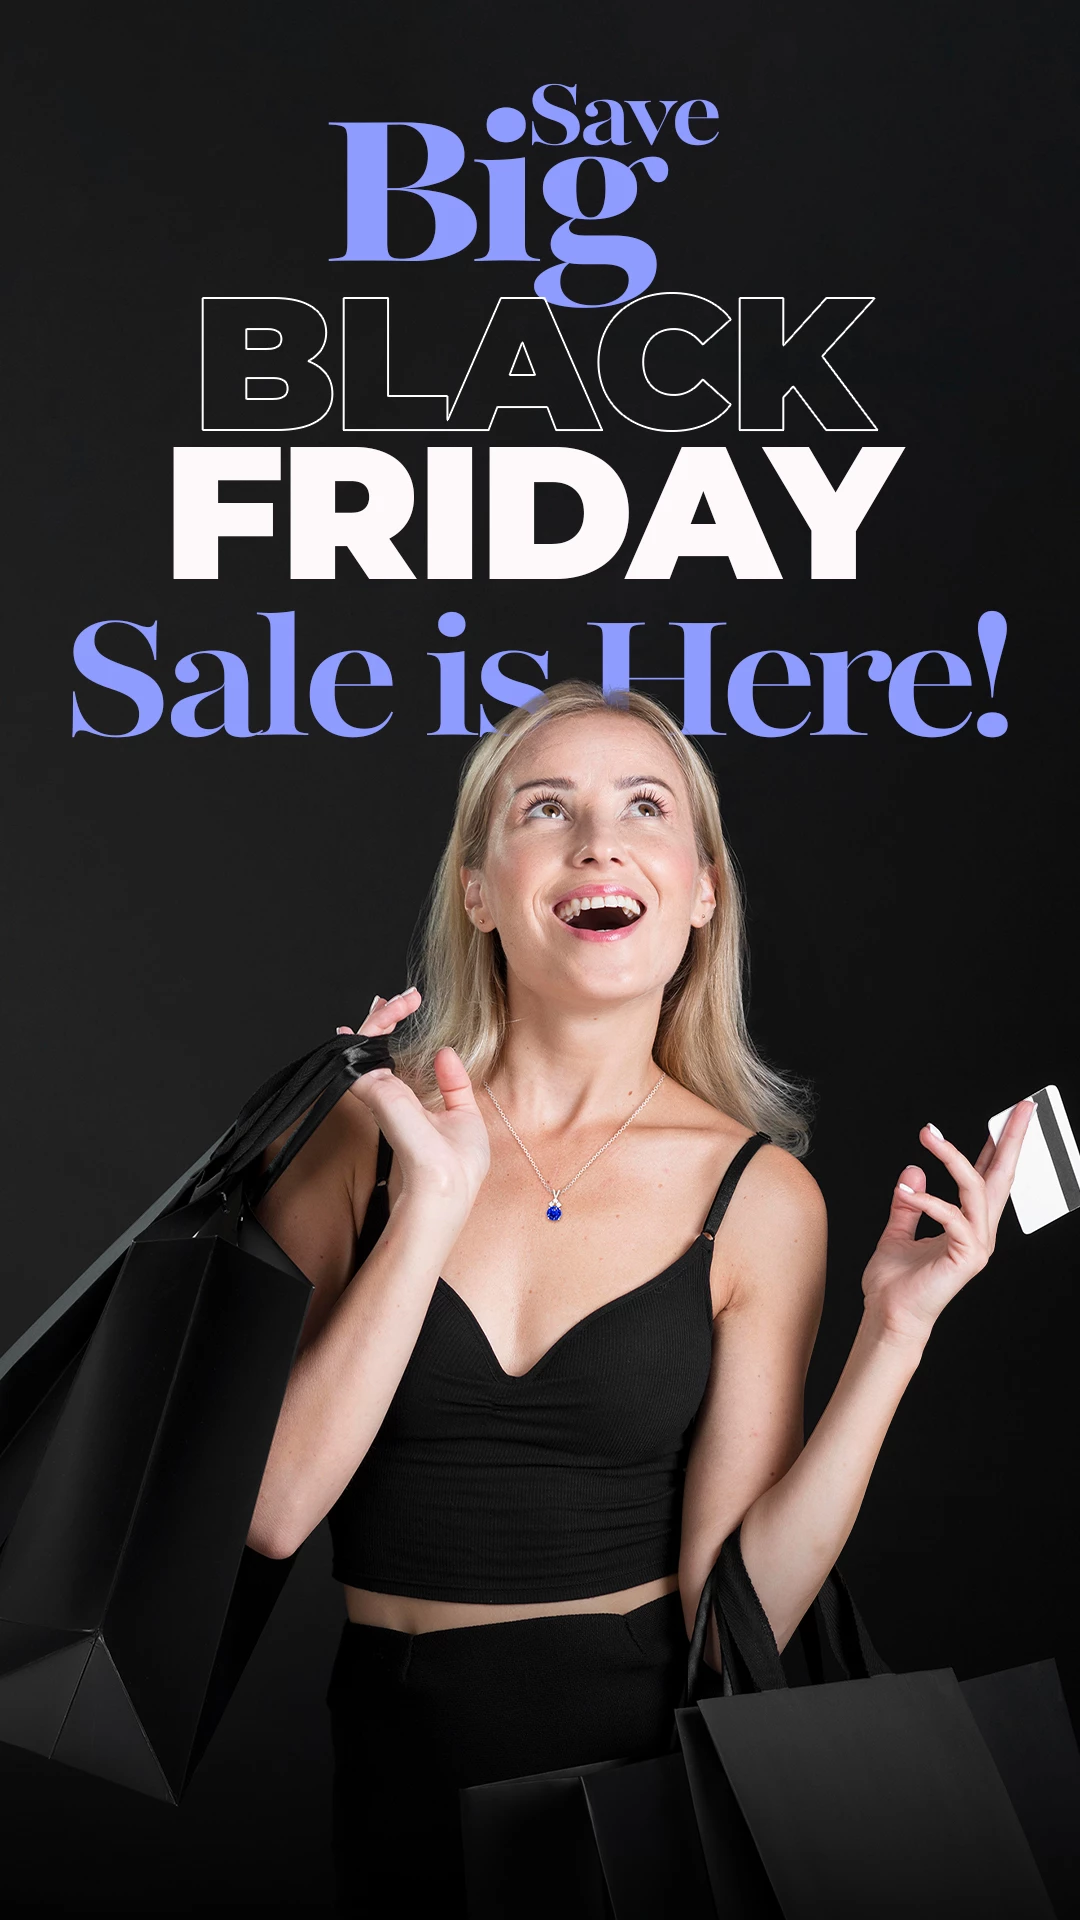 $5 Friday Sale!  Who is ready for our HUGE $5 Friday Sale this